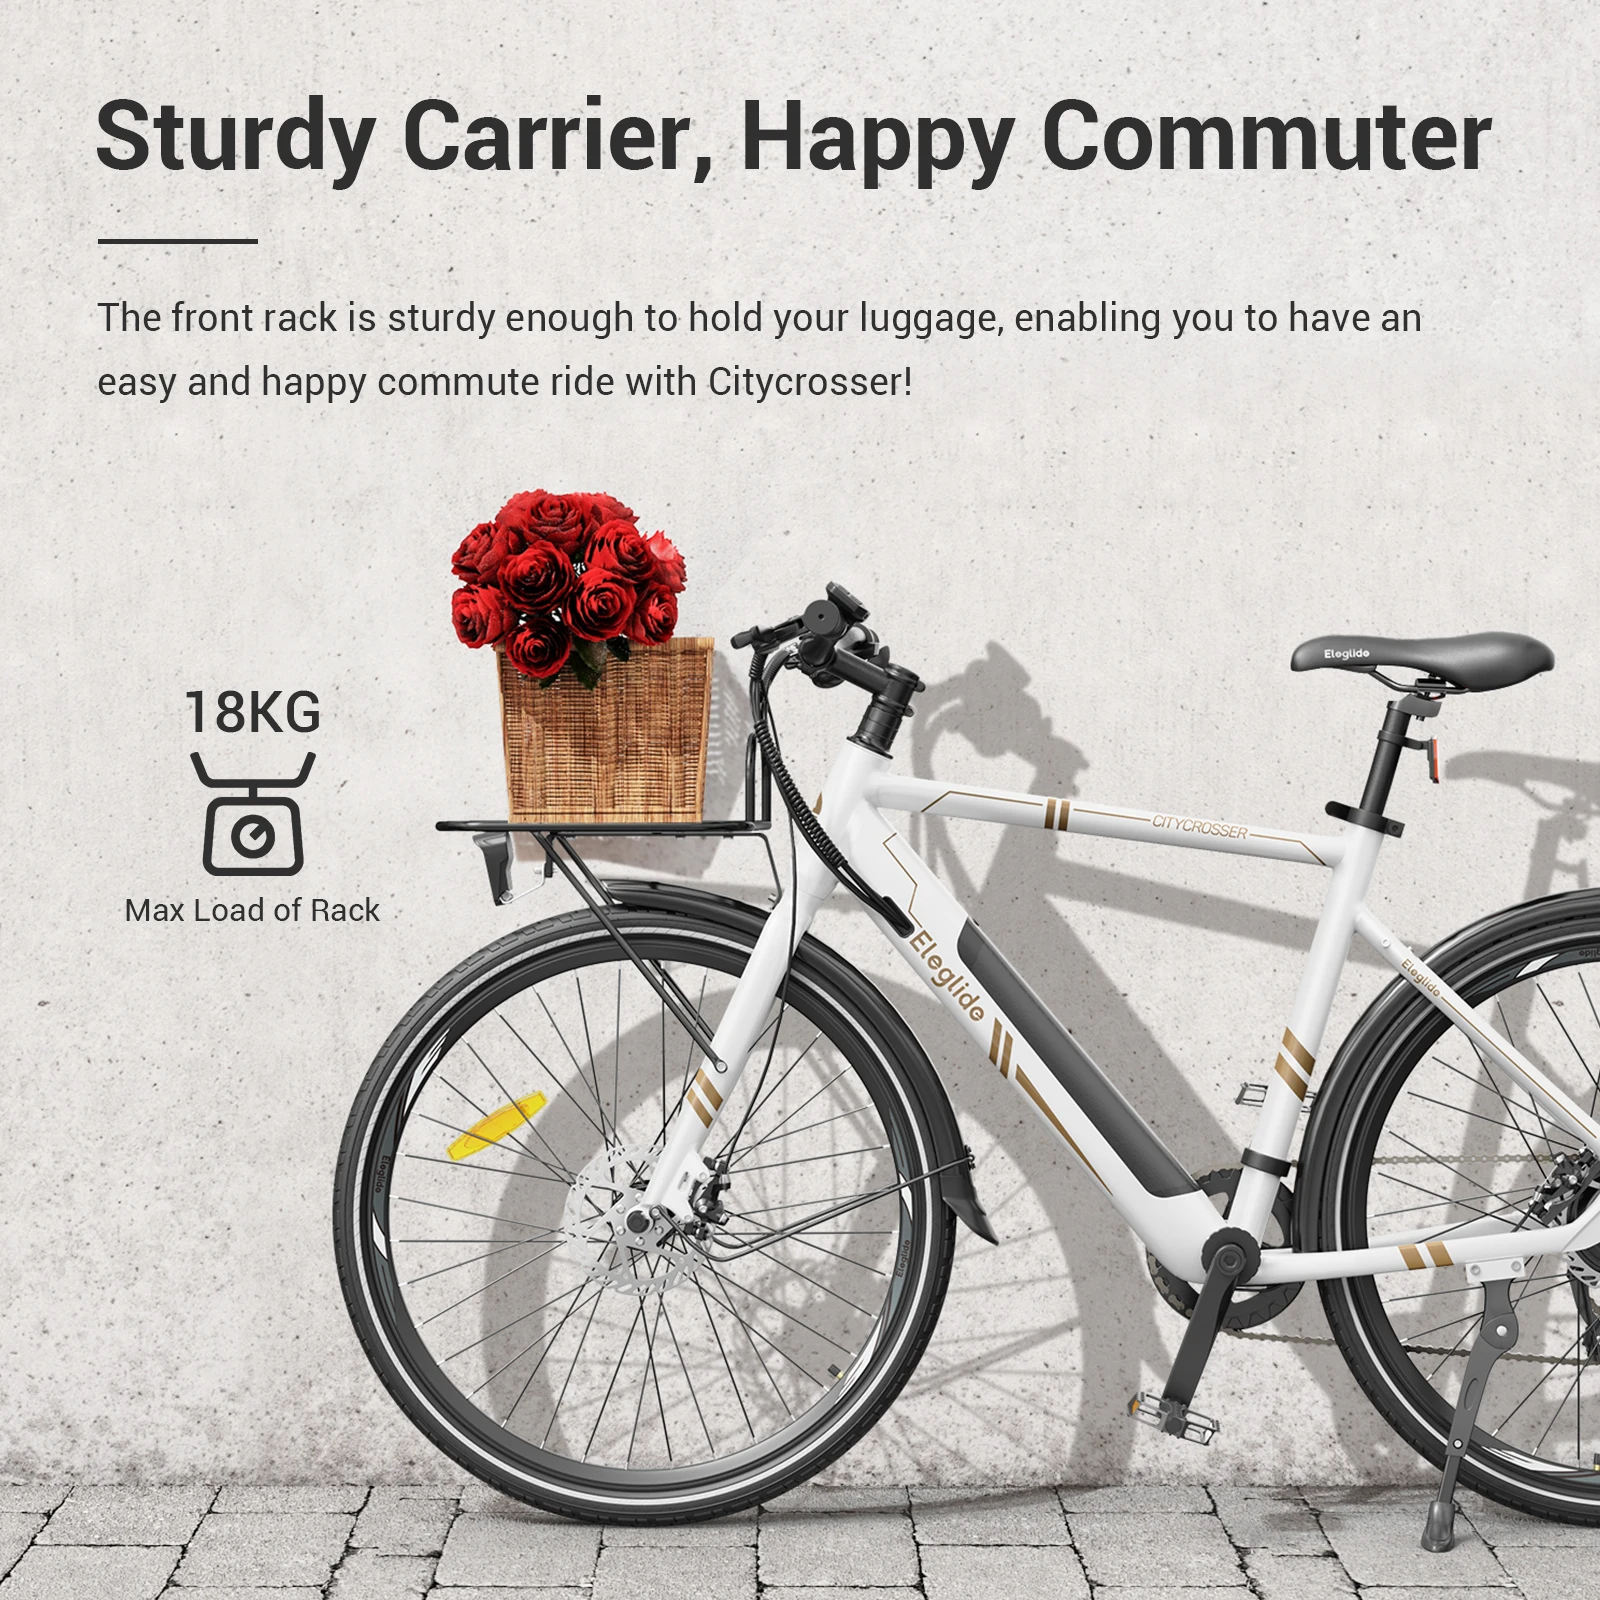 Sturdy Carrier, Happy Commuter